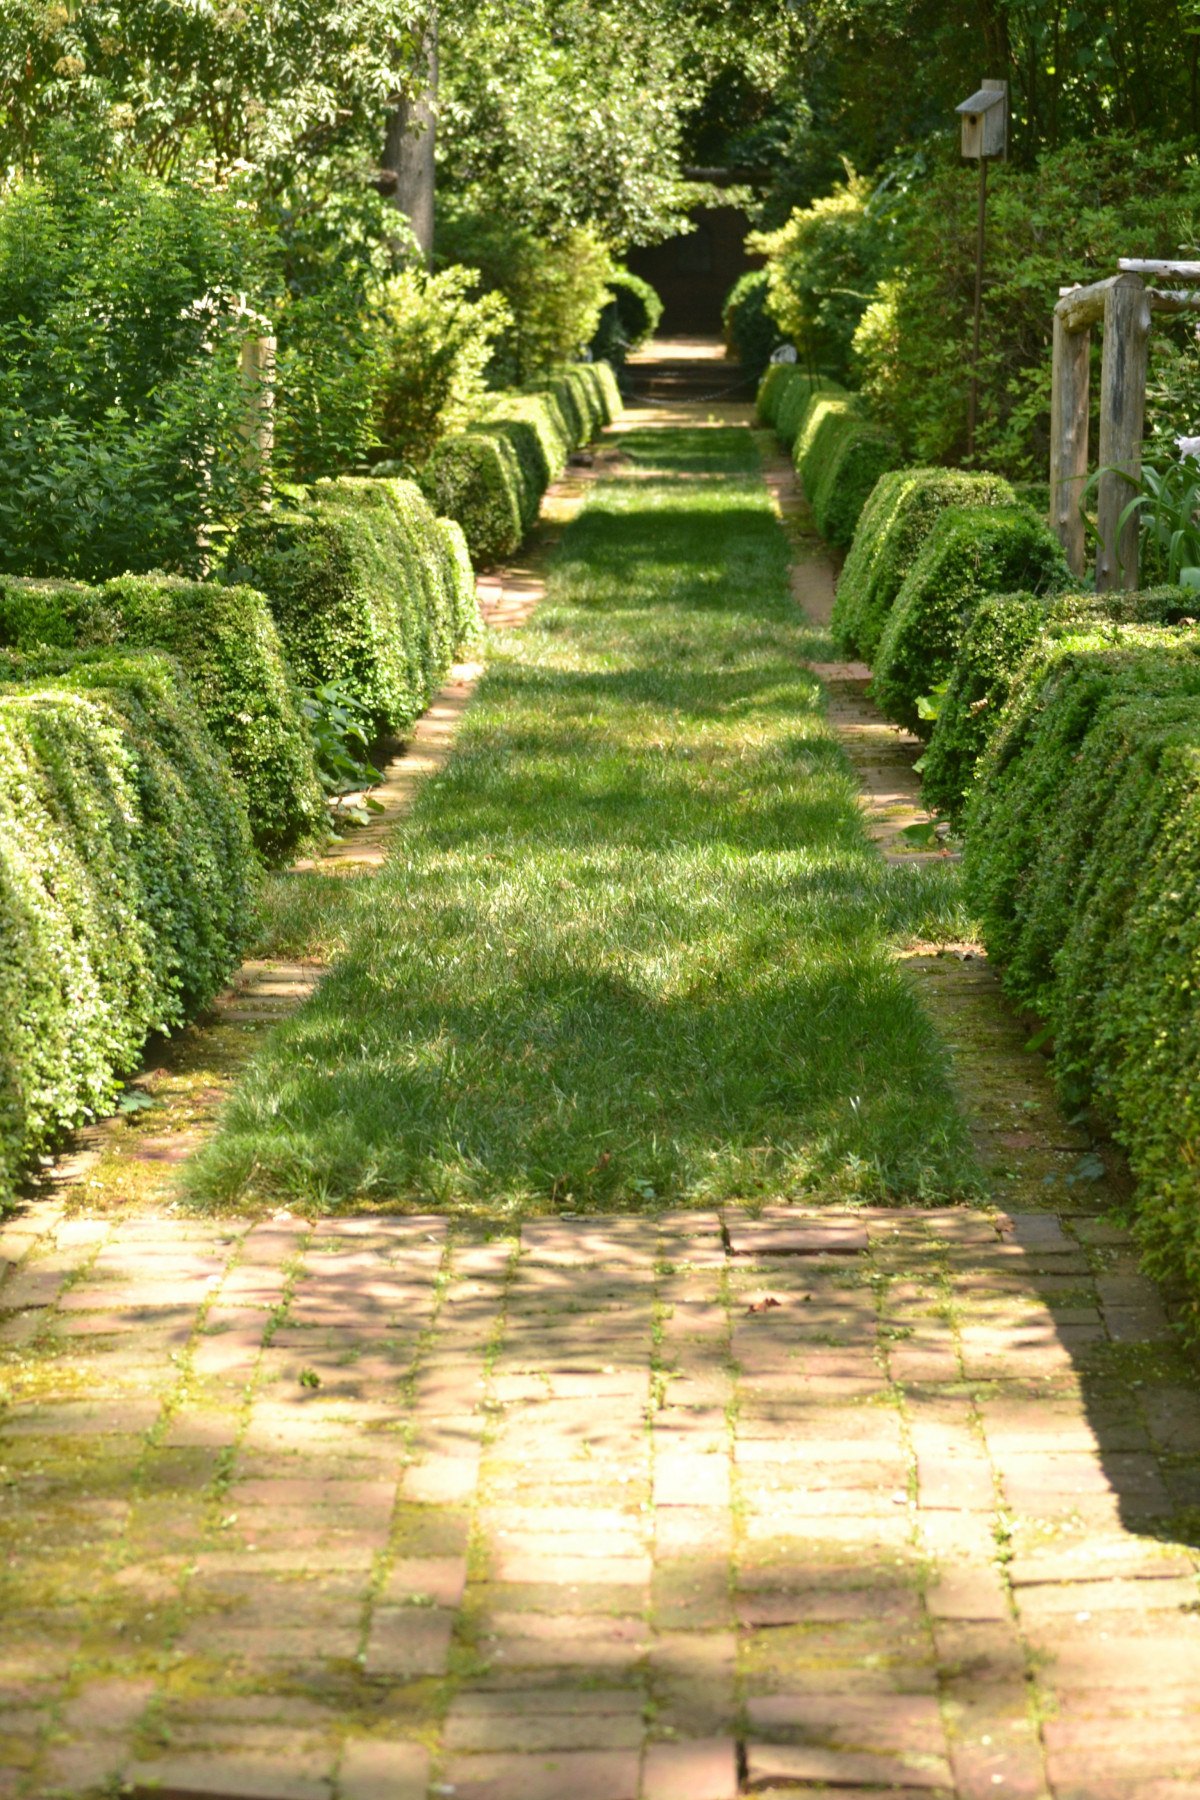 Long courtyard defined by hedges